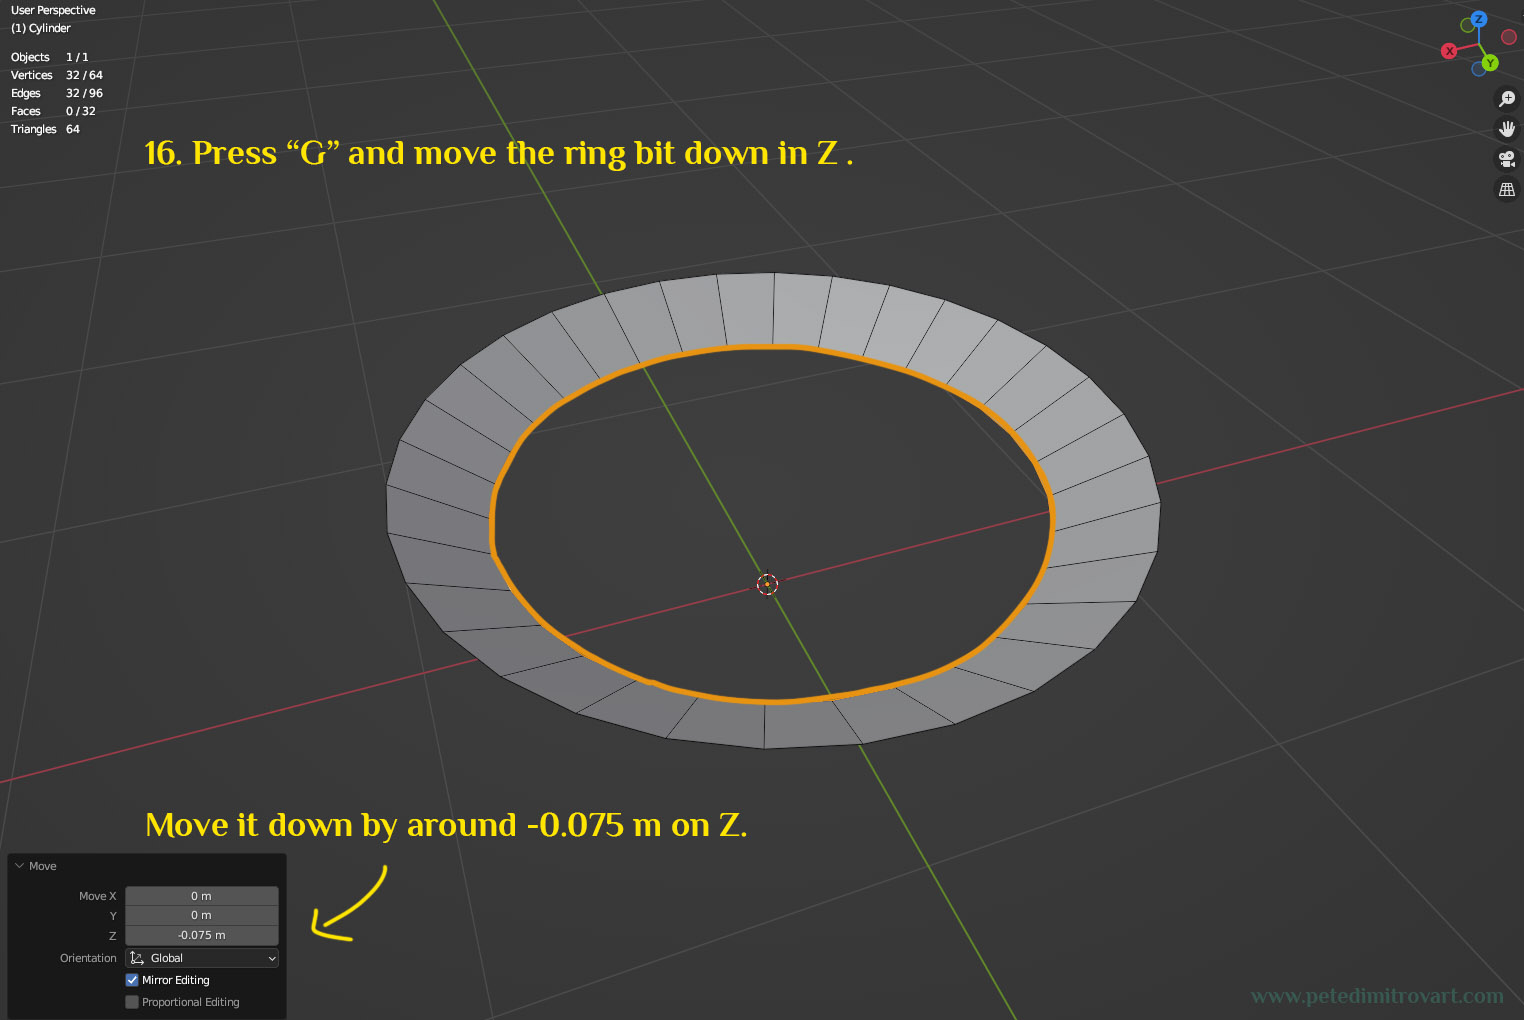 The selection of edge loop is now moved downwards in space by -0.075m. Yellow text reads: “16. Press “G” and move the ring bit down in Z. Move it down by around -0.075 m on Z.”.